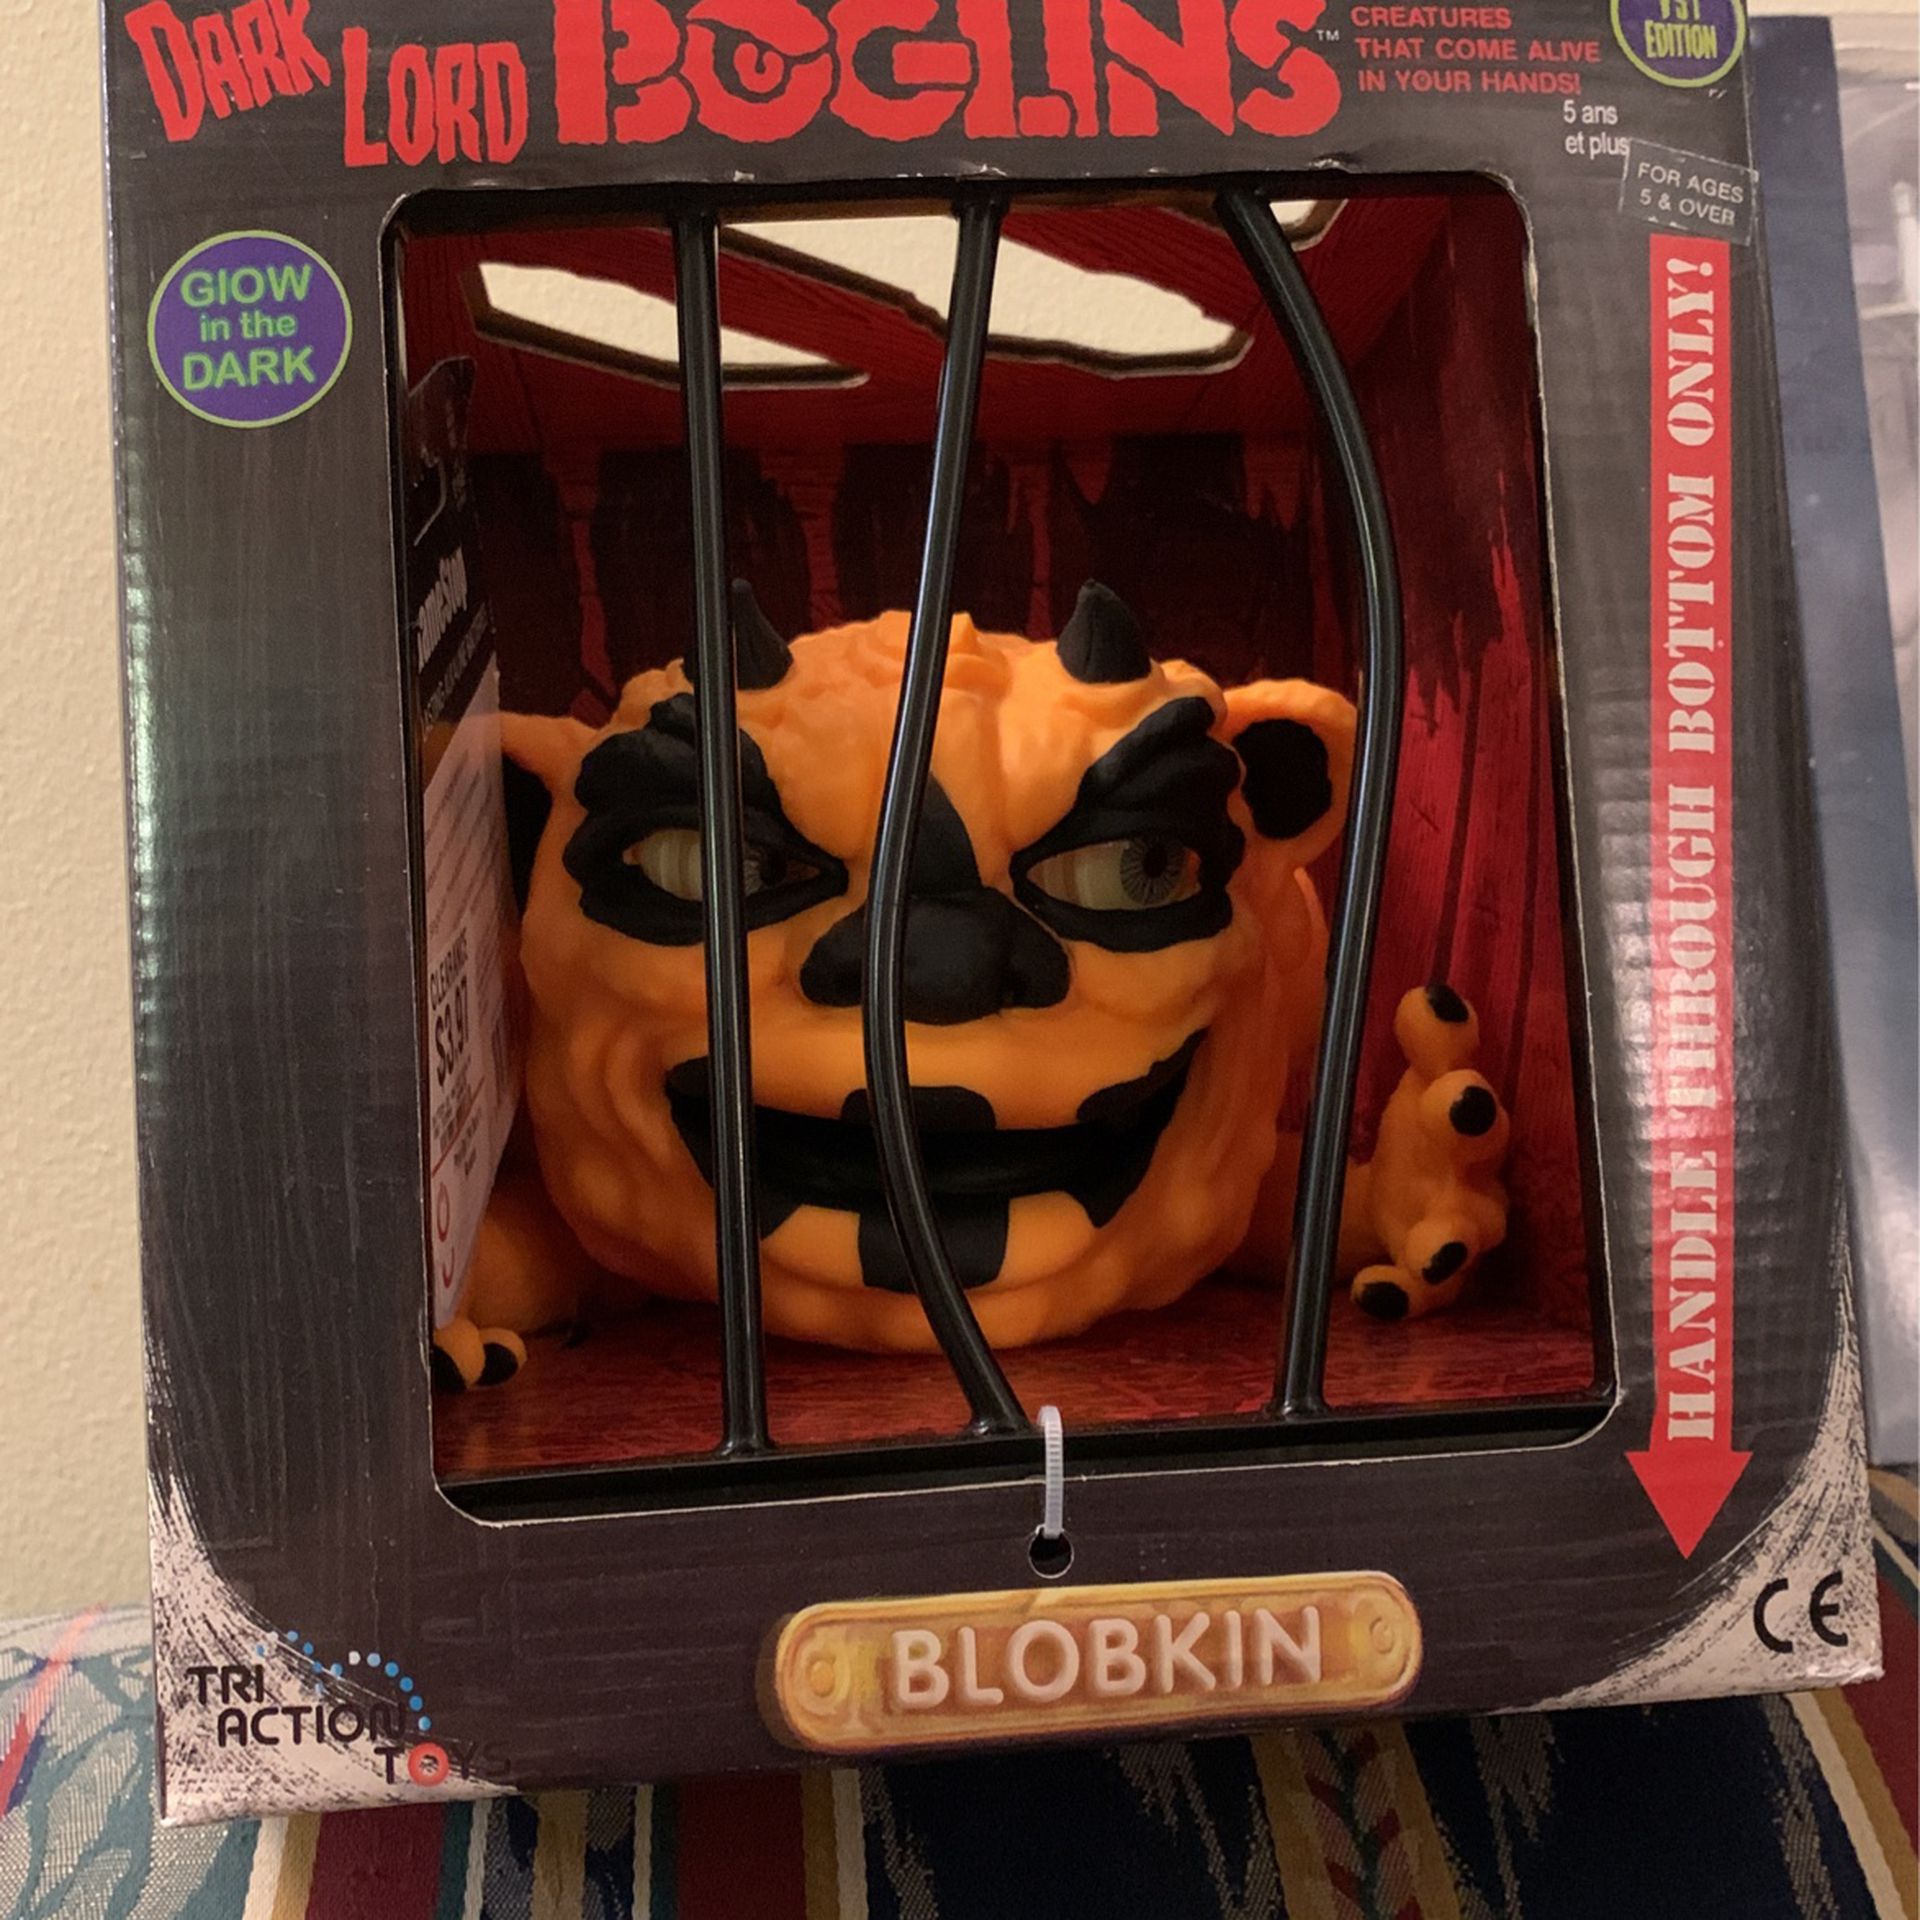 If You Remember These Boggles, BOGLINS: They’re Almost Antique Collectibles Now Who Knows The Price